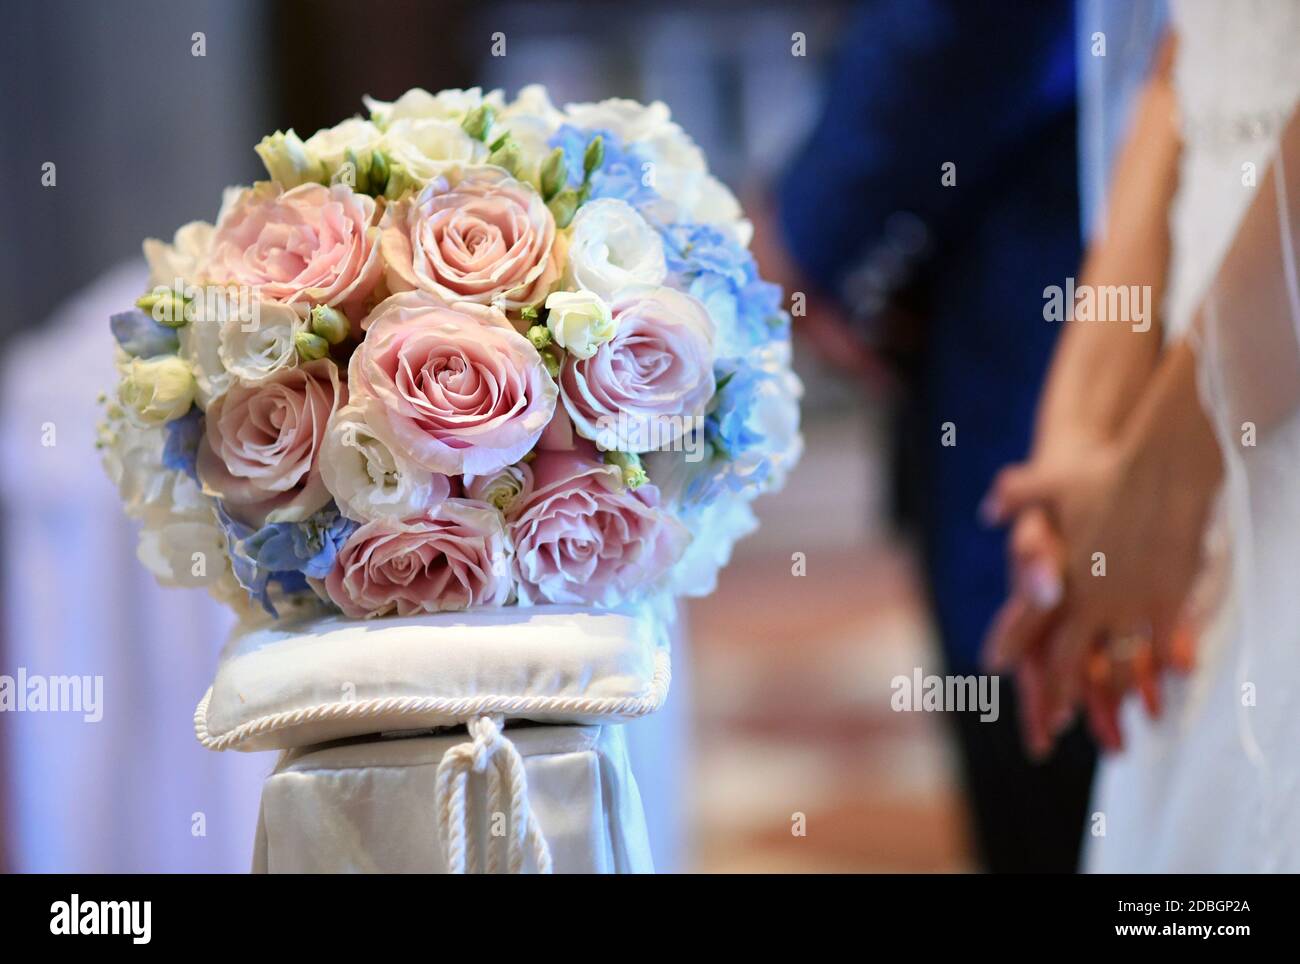 Bridal posy on a cushion with groom and bride in the background holding hands with selective focus to the flowers Stock Photo